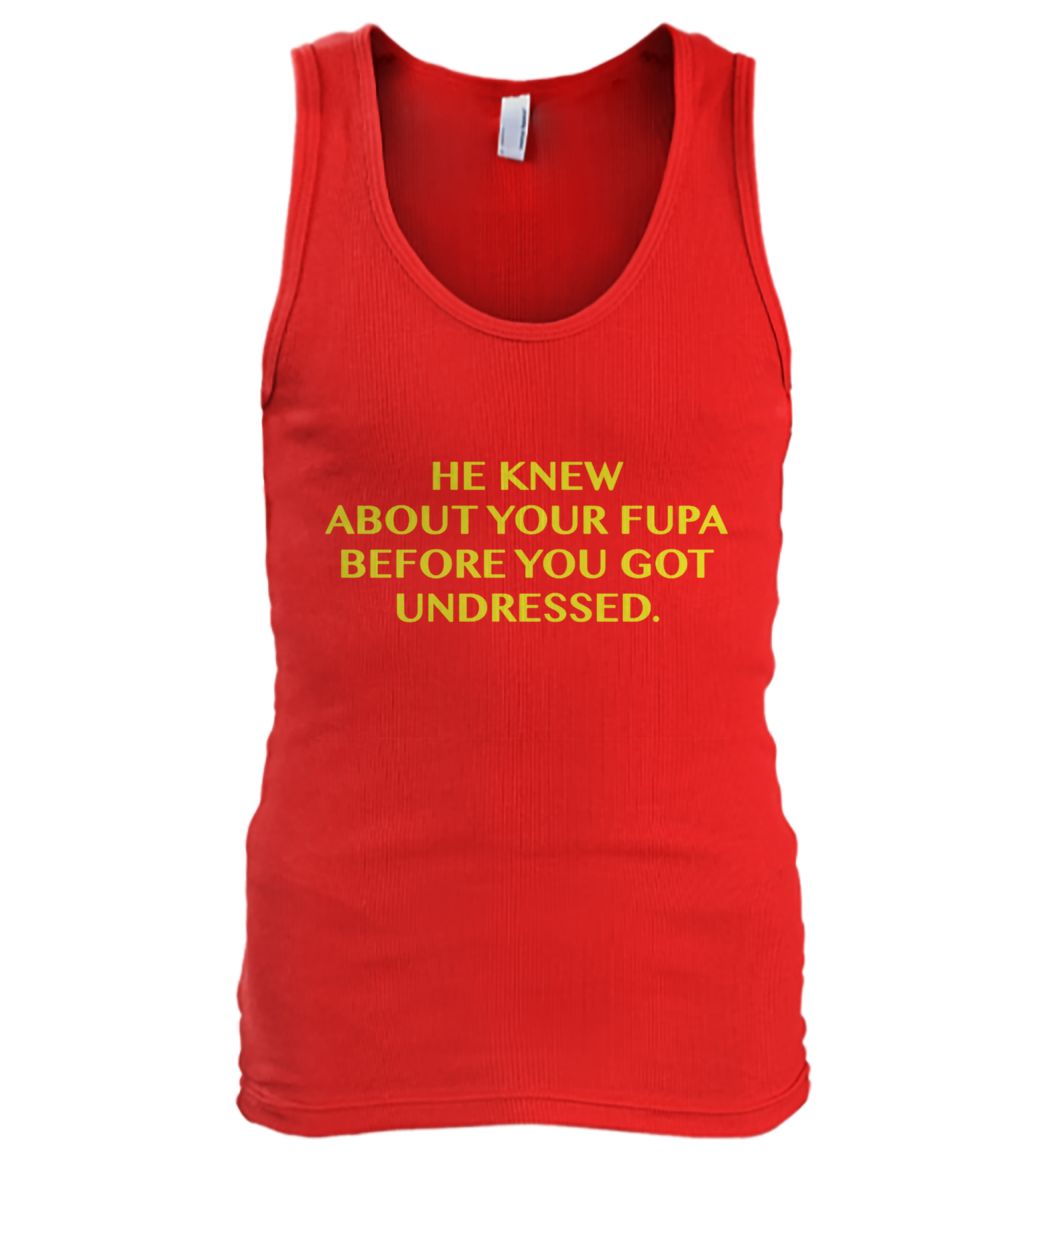 He knew about your fupa before got you undressed men's tank top